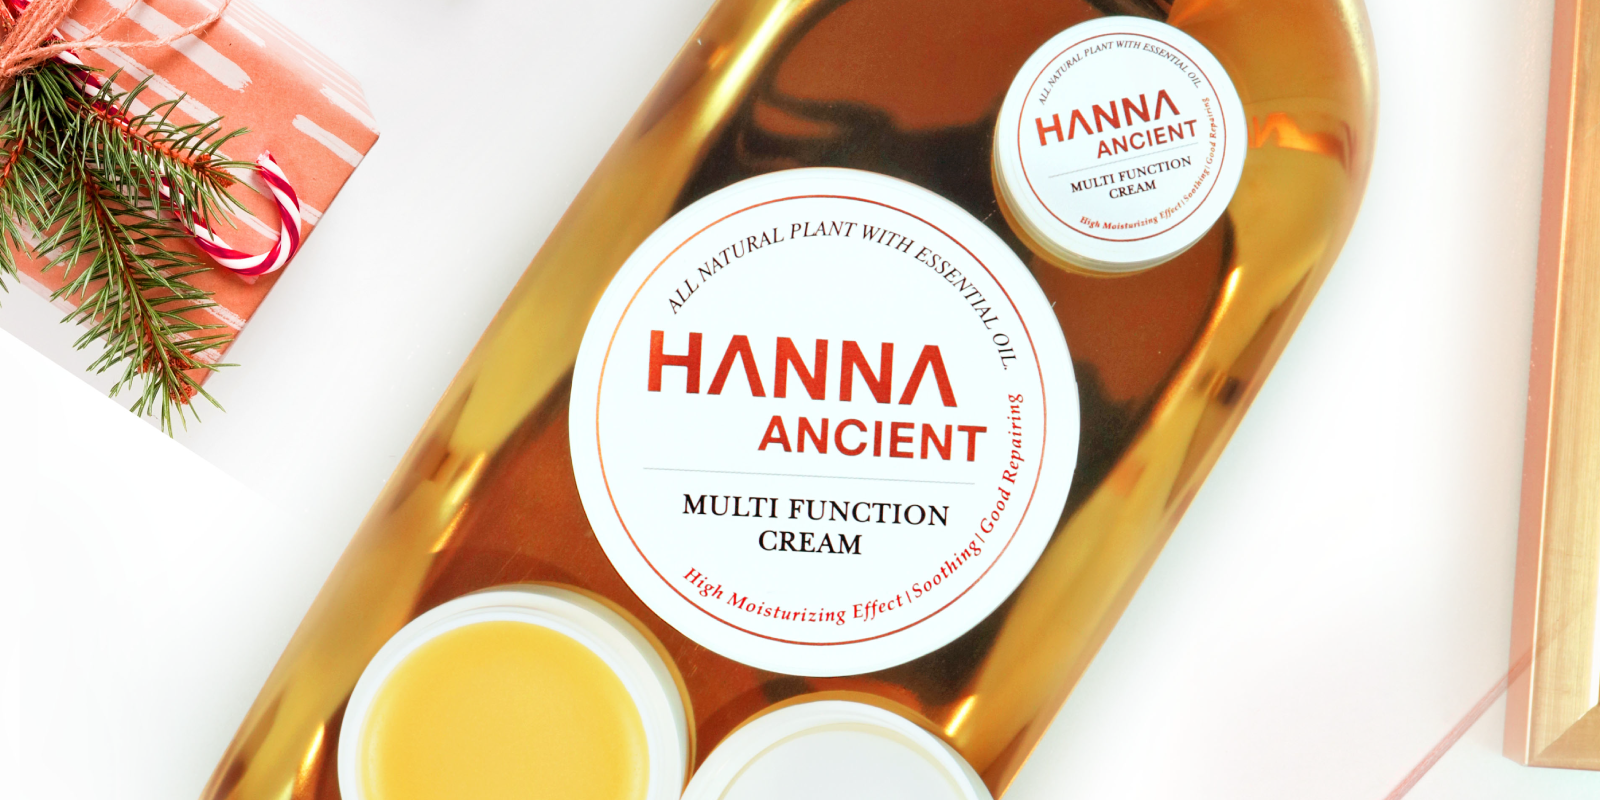 You are currently viewing Hanna Ancient Multi Function Cream Blog 1